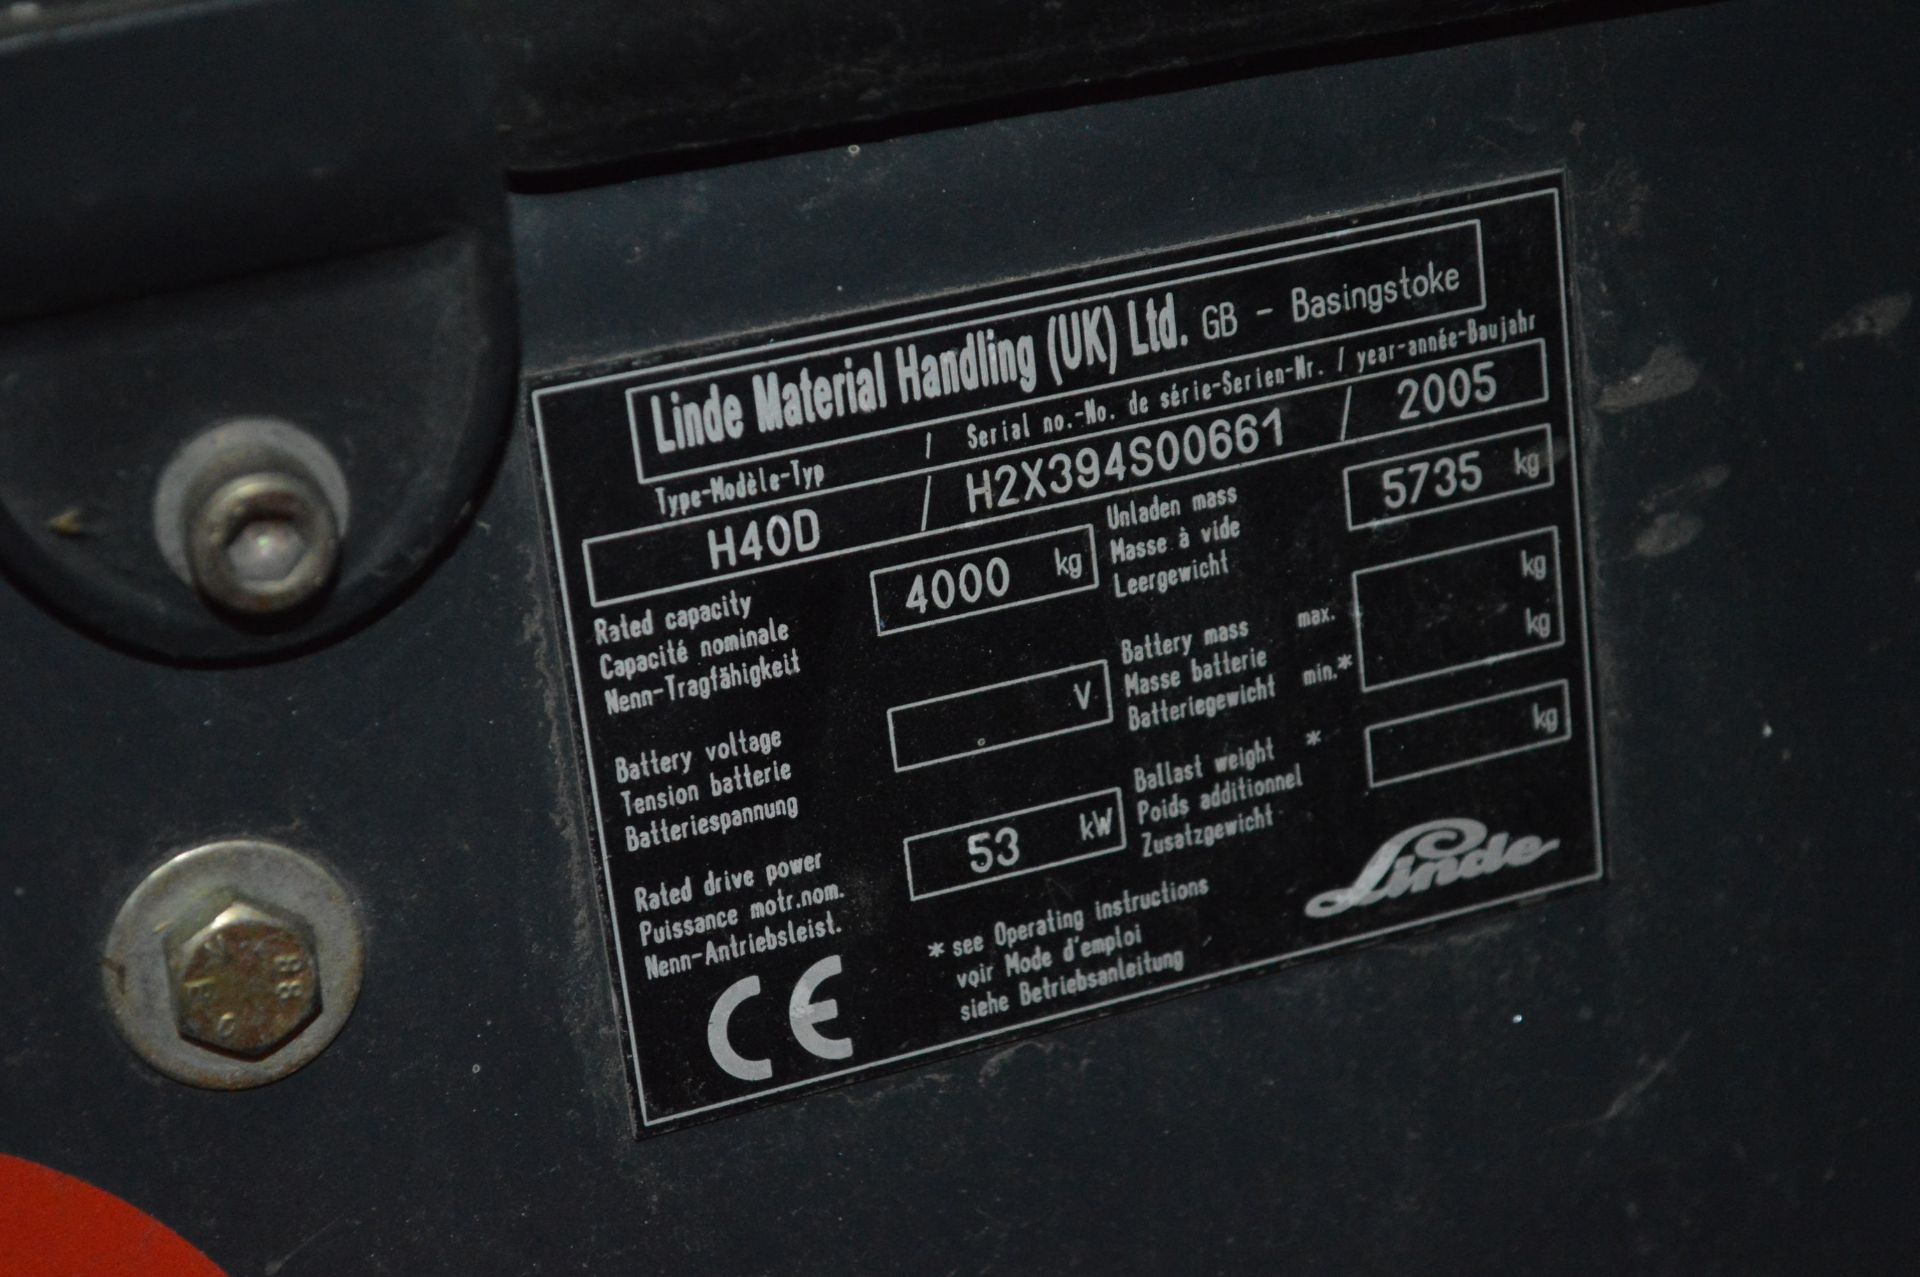 Linde H40D 4000kg cap. DIESEL ENGINE FORK LIFT TRUCK, serial no. H2X394S00661, year of manufacture - Image 7 of 7